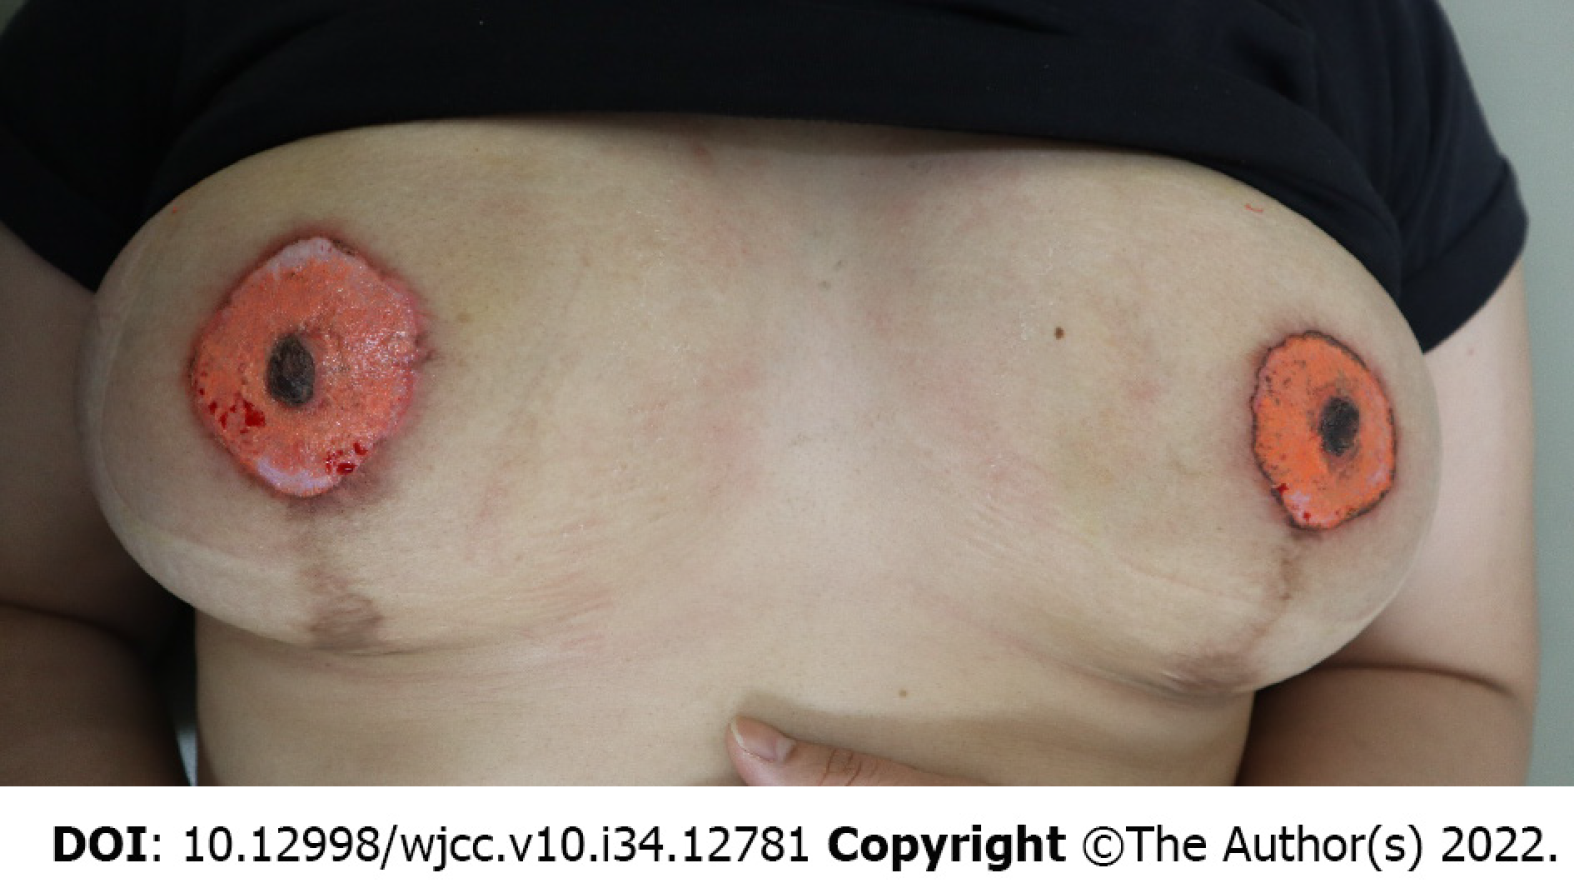 Complication after nipple-areolar complex tattooing performed by a non-medical person: A case report